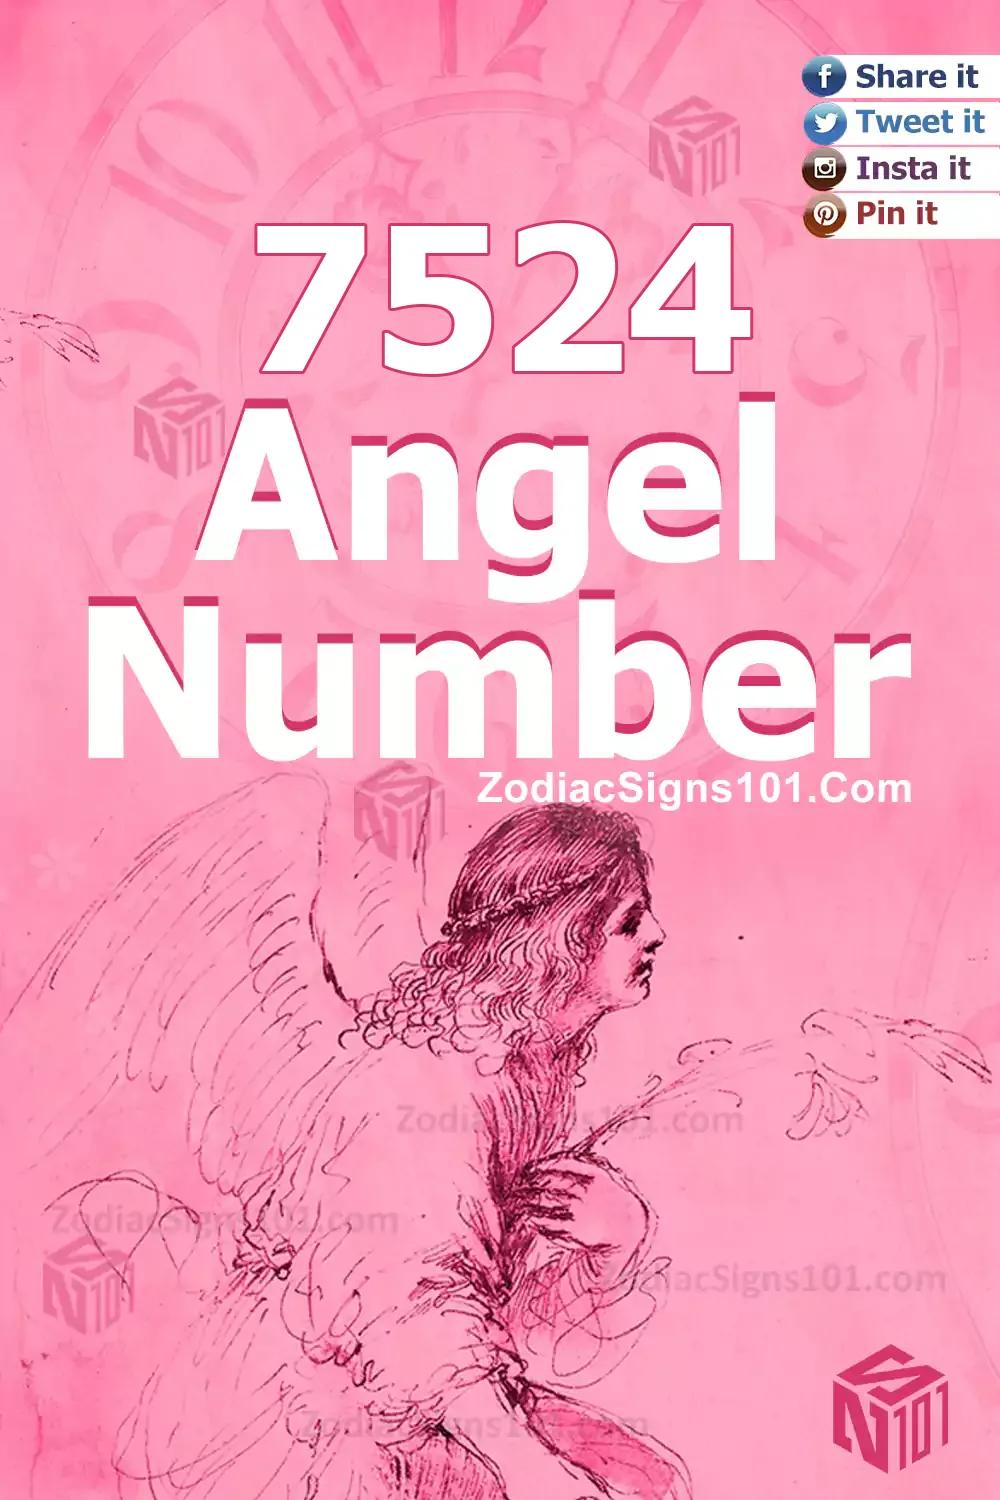 7524 Angel Number Meaning